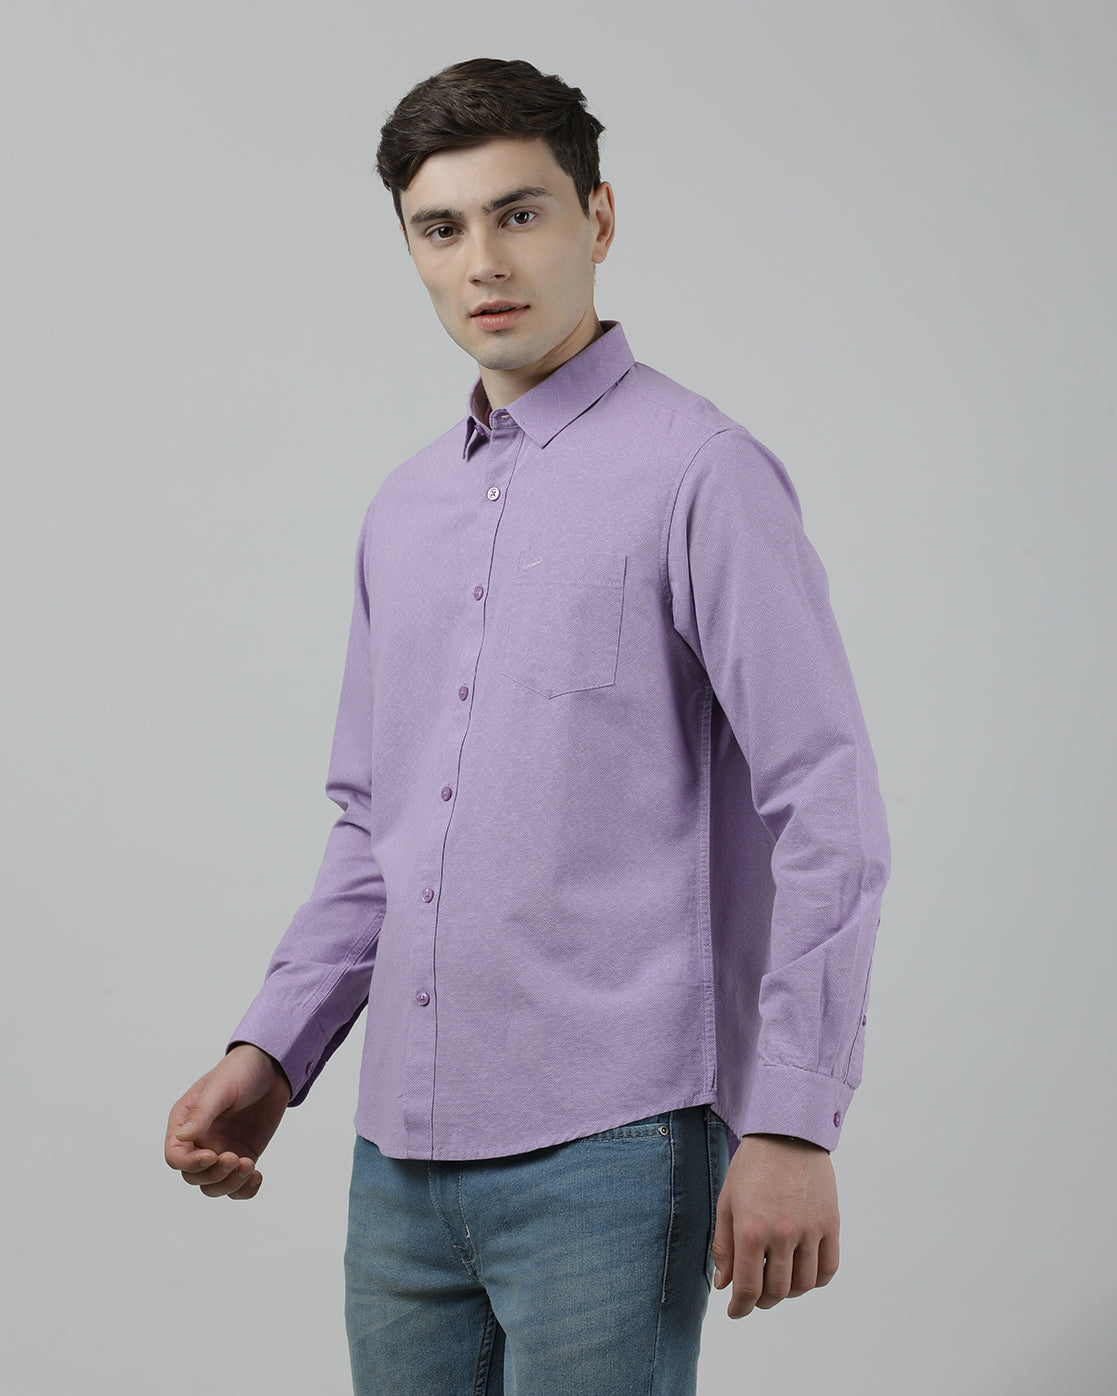 Casual Full Sleeve Comfort Fit Printed Shirt Purple with Collar for Men